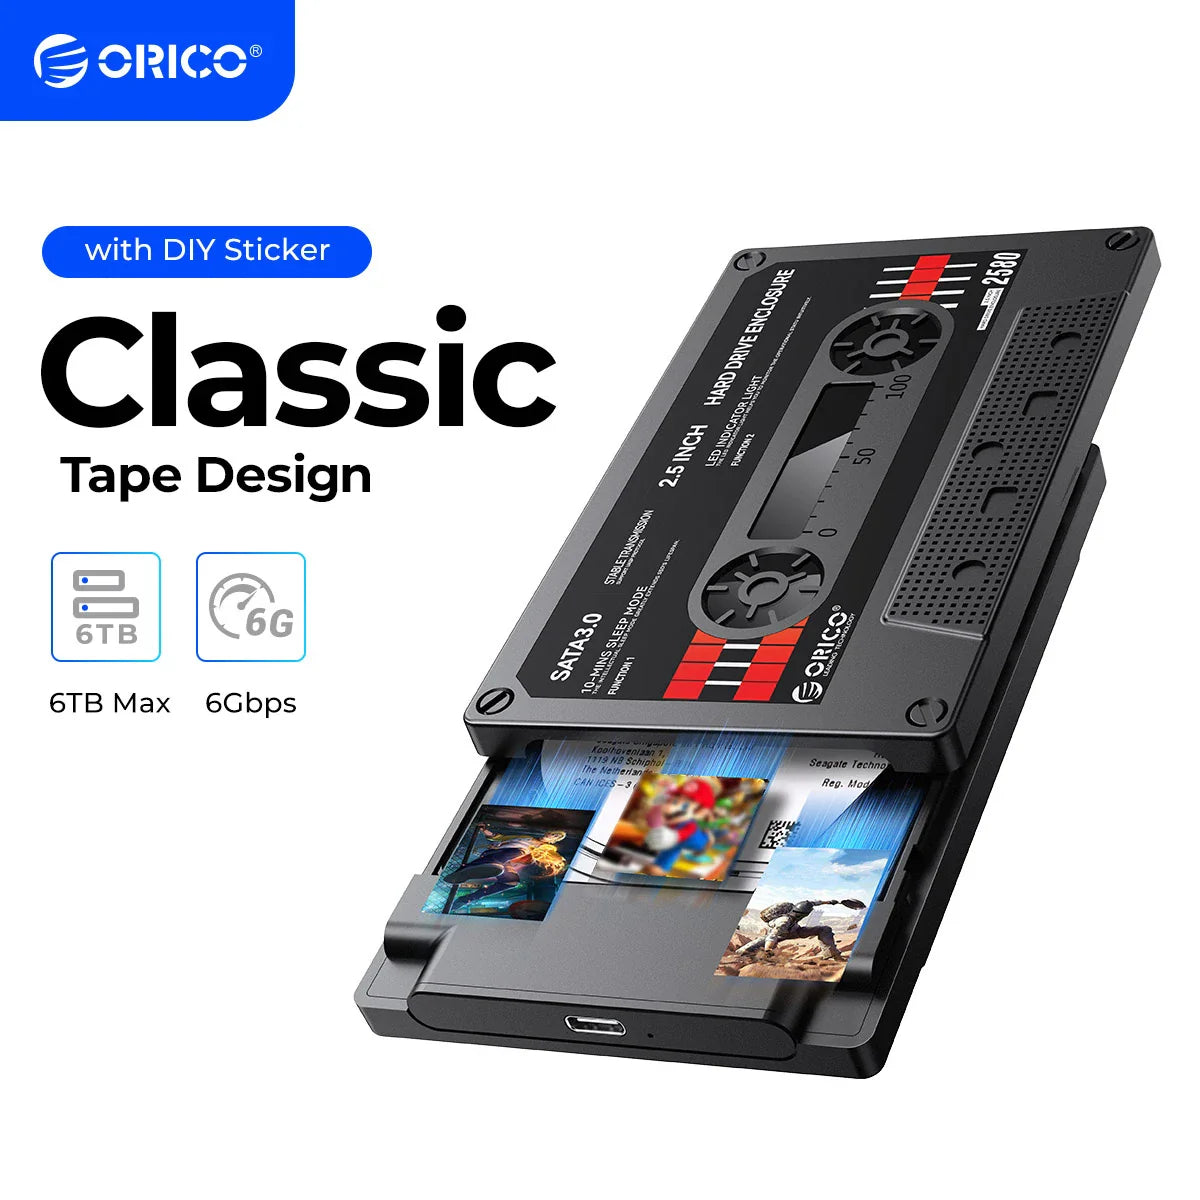 ORICO HDD Enclosure: High-Speed Data Transfer and Universal Compatibility  ourlum.com   